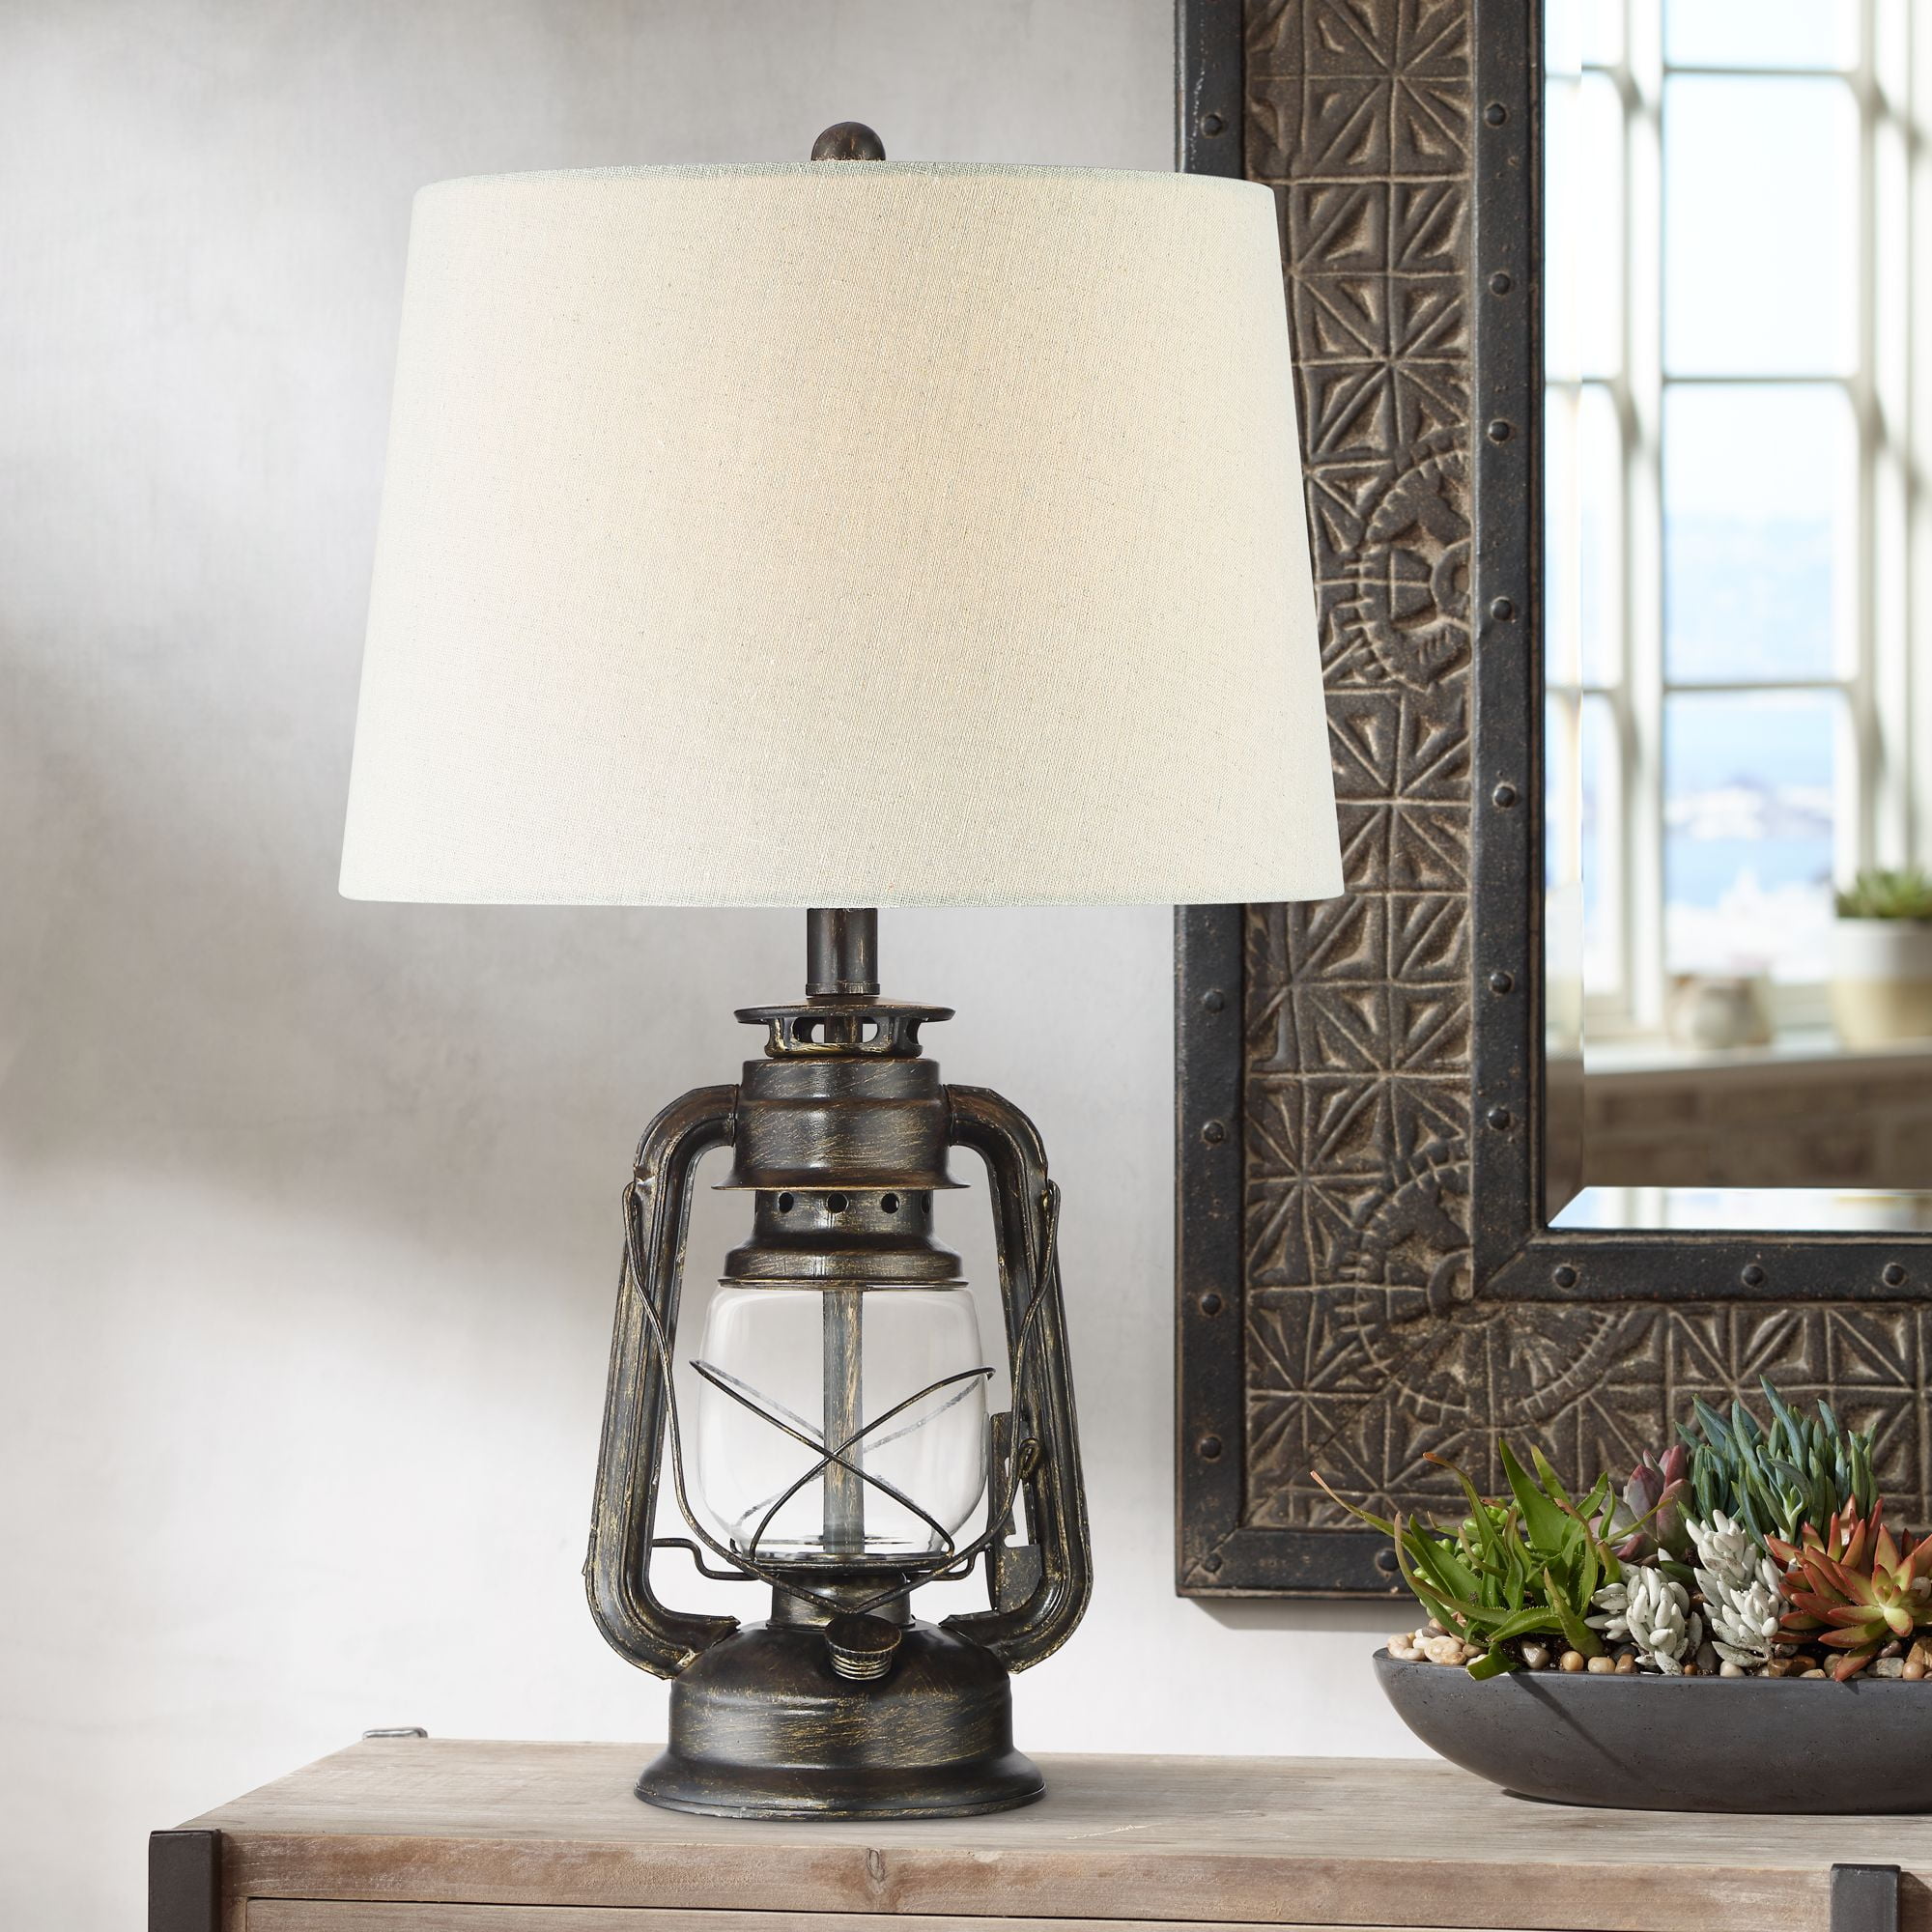 Franklin Iron Works Rustic Industrial, Industrial Bronze Iron Table Lamp With Beige Hardback Shade